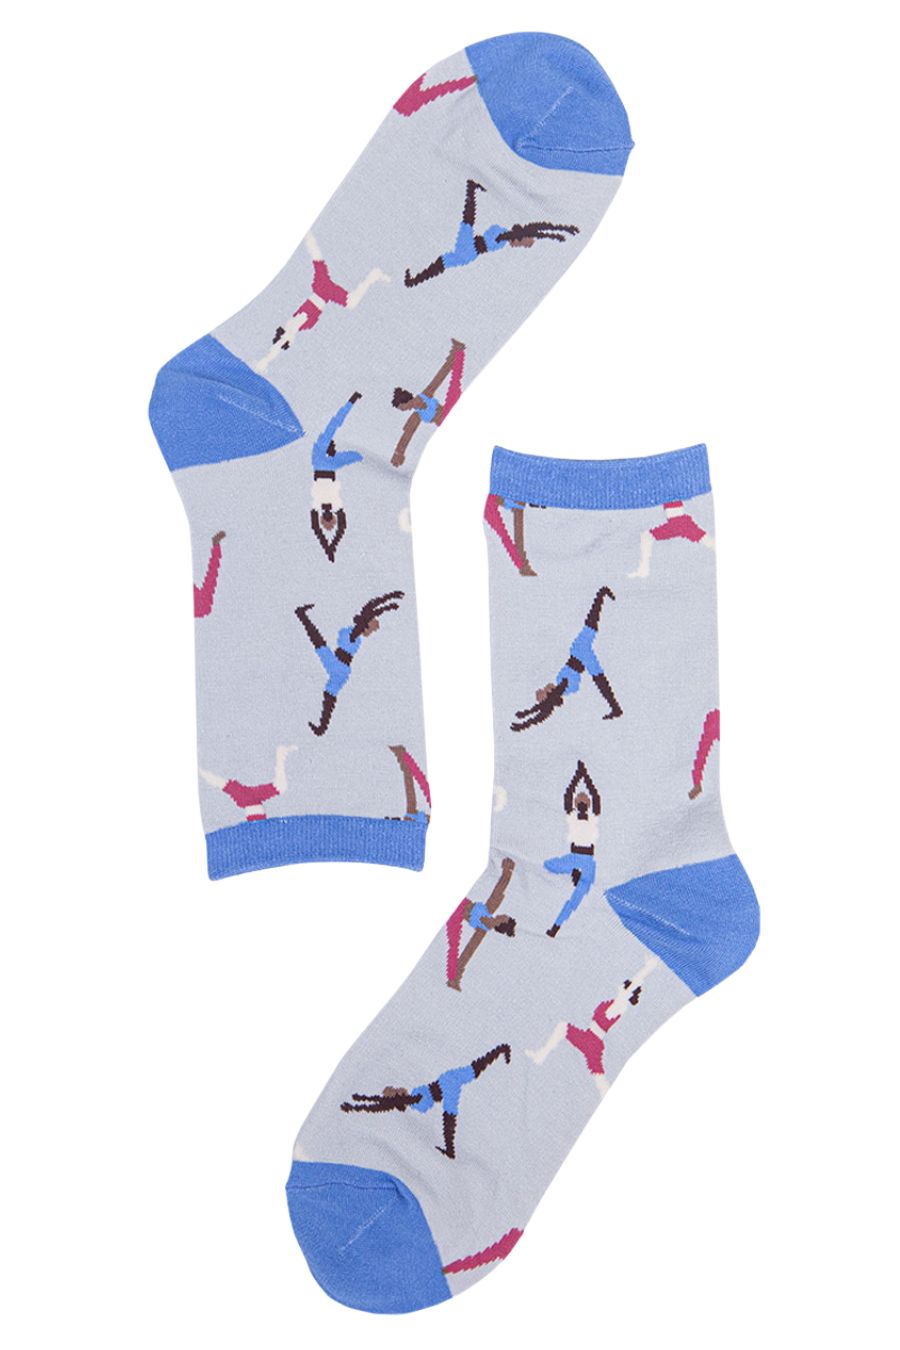 grey, blue ankle socks showing people in yoga poses